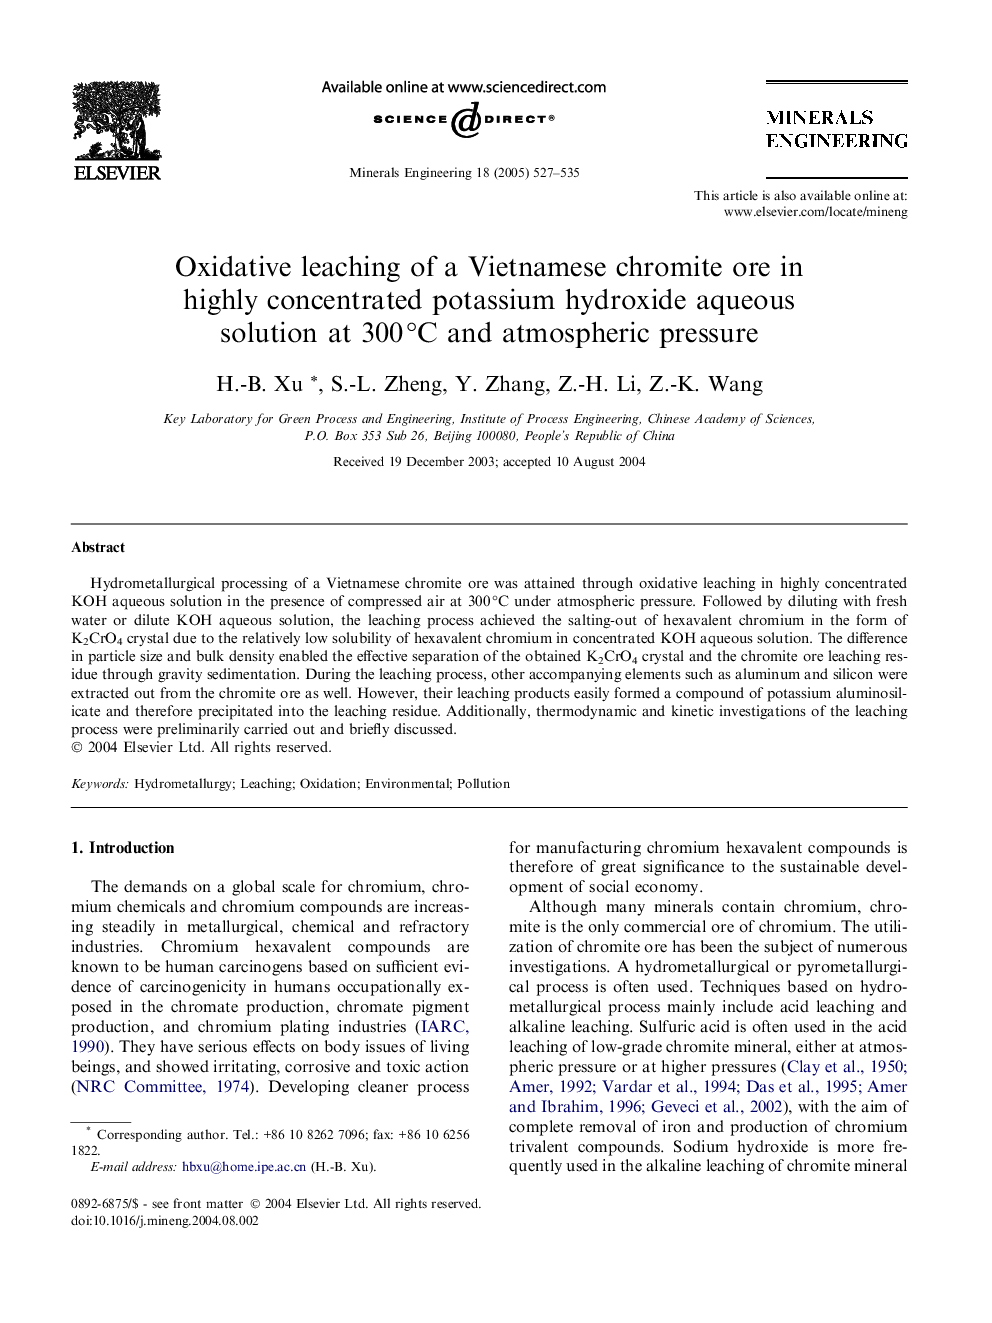 Oxidative leaching of a Vietnamese chromite ore in highly concentrated potassium hydroxide aqueous solution at 300Â Â°C and atmospheric pressure